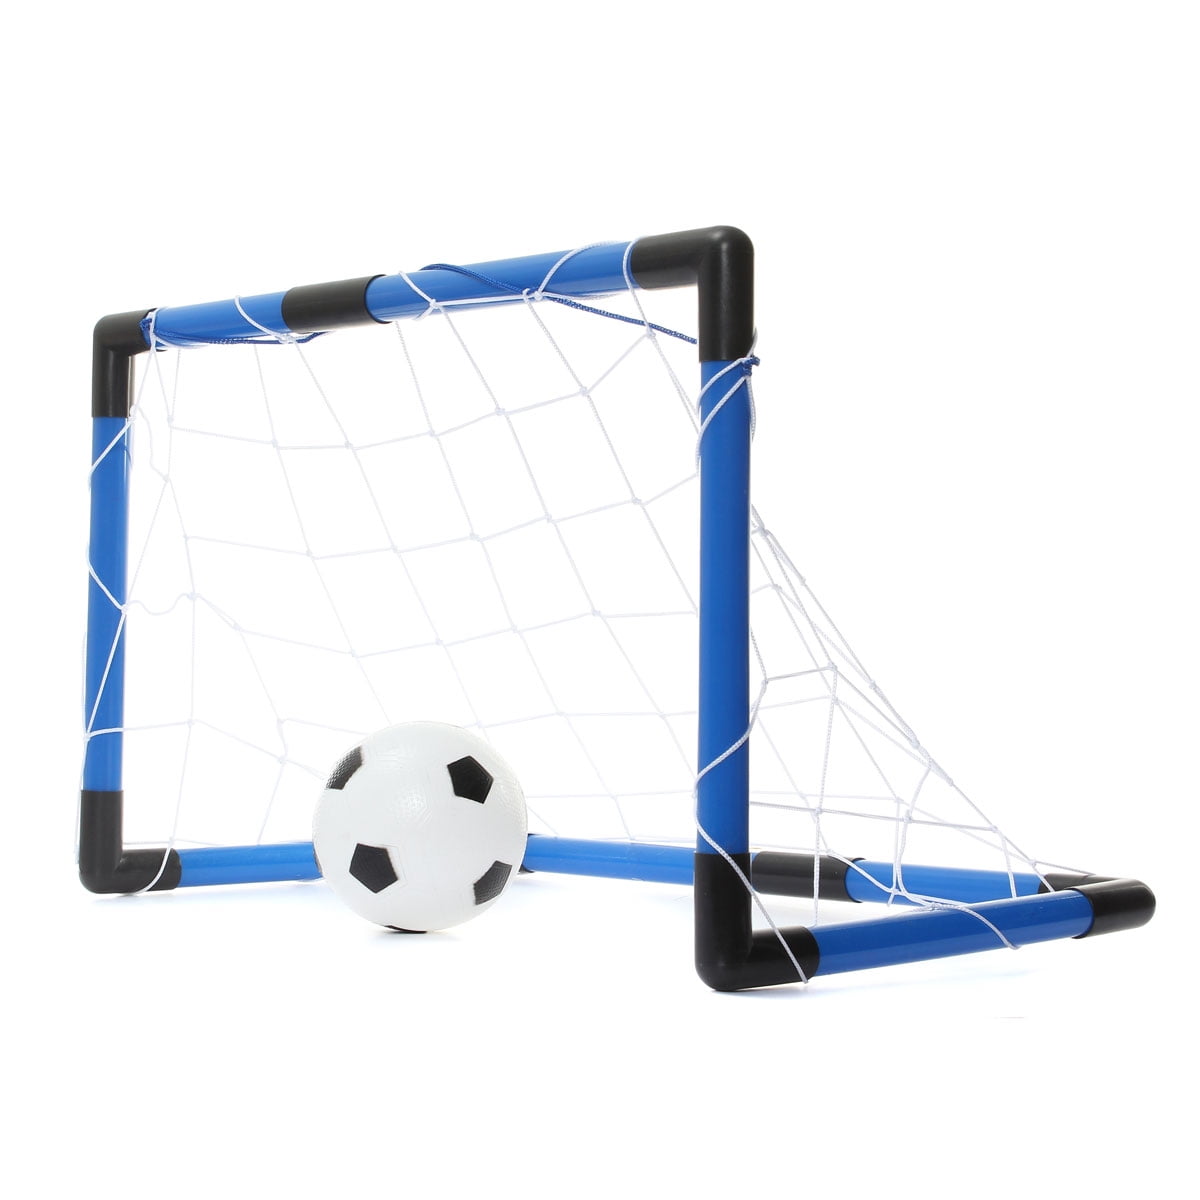 Youth Soccer Goal Net Football Sports Pump Set Outdoor Indoor Traini ~ 